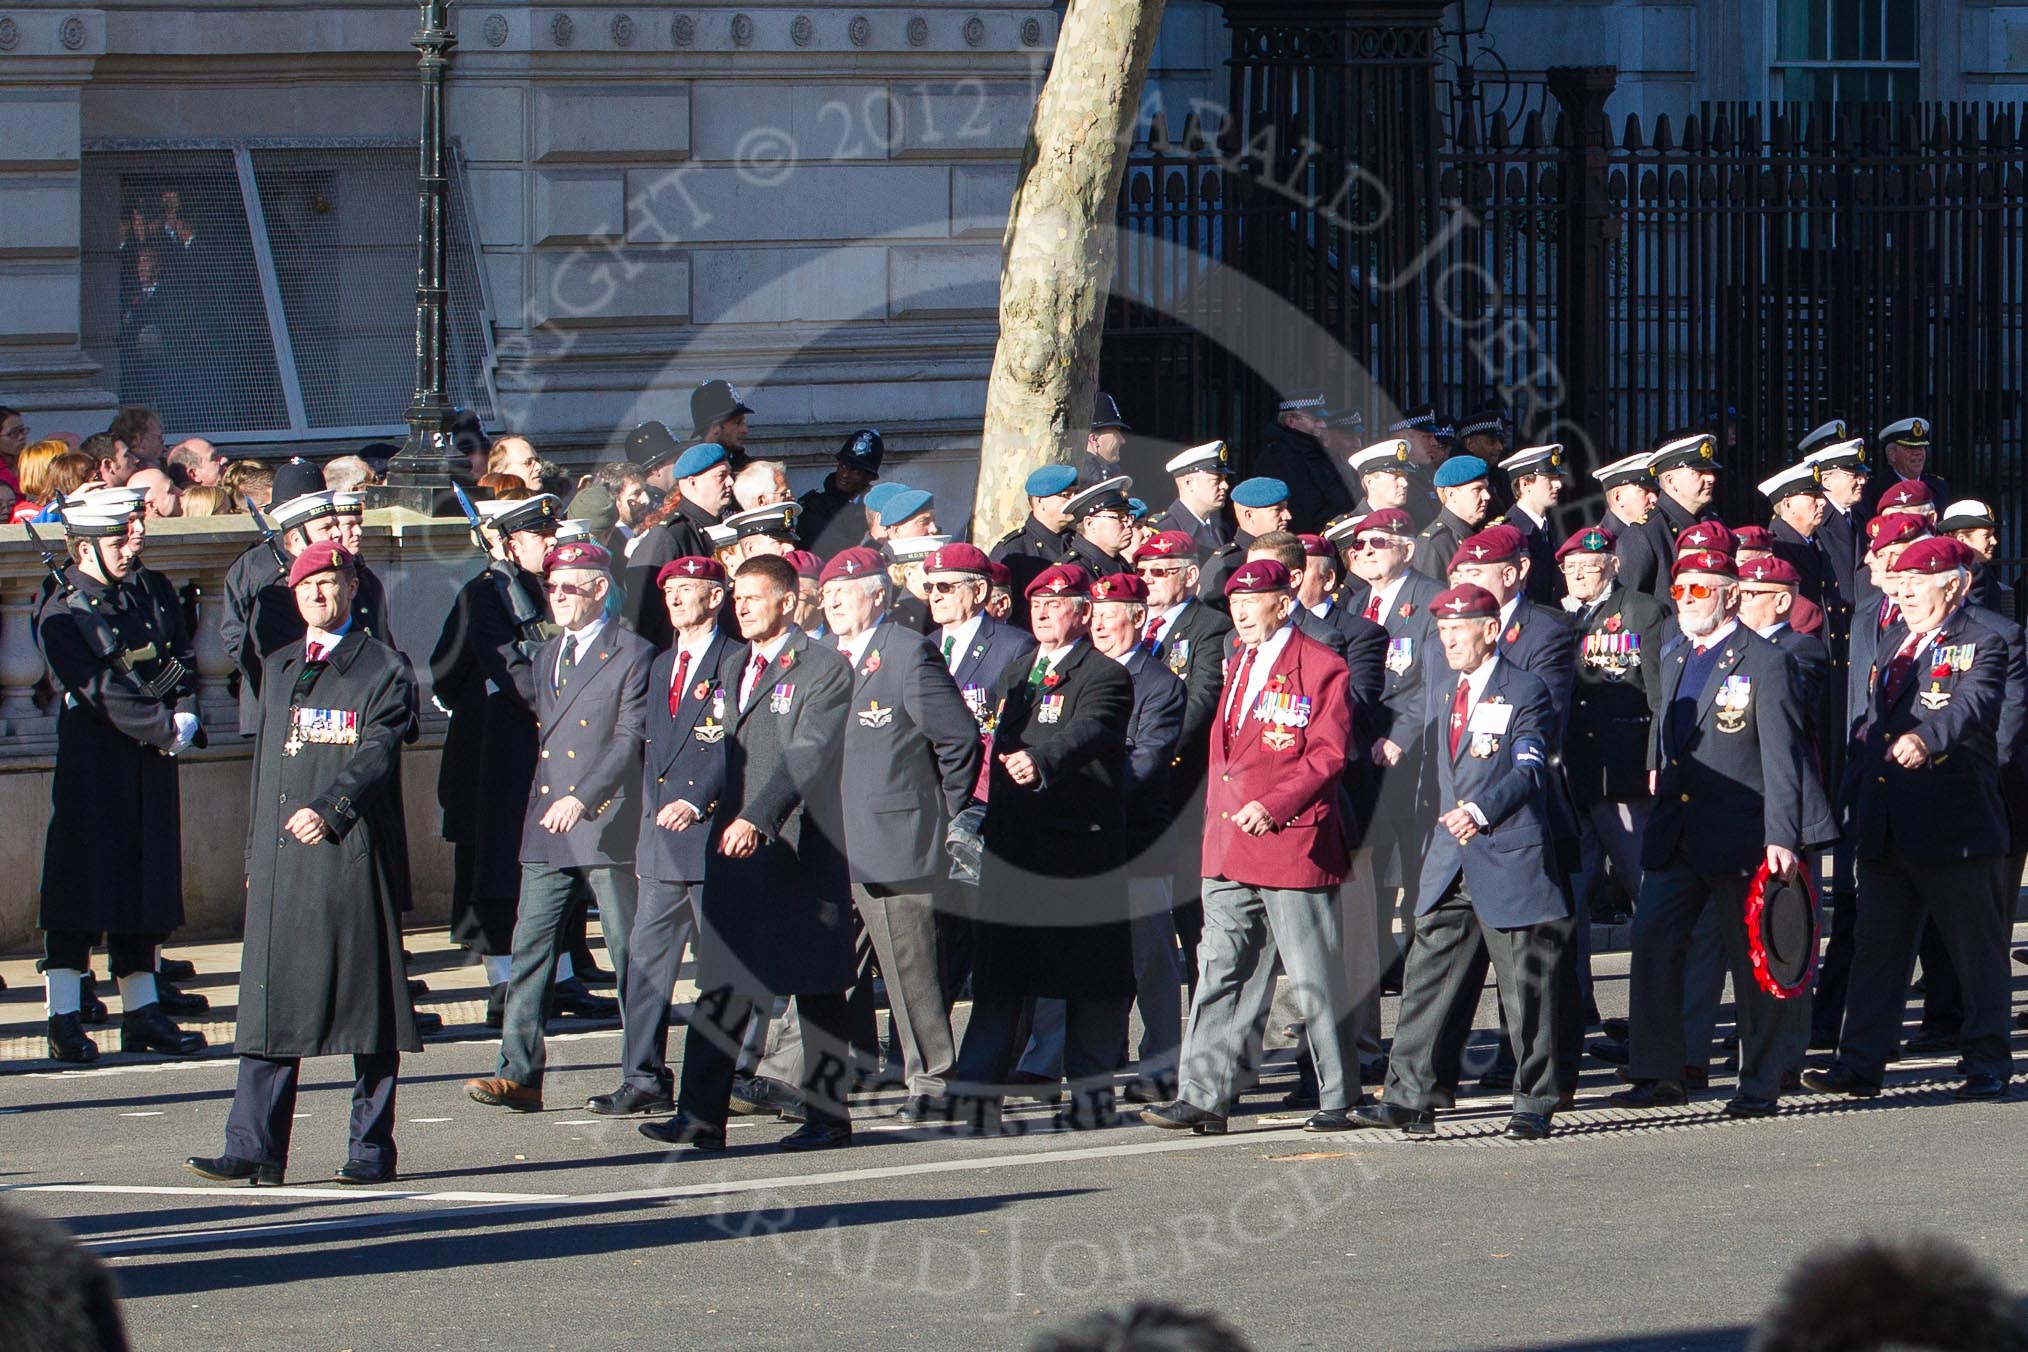 Remembrance Sunday 2012 Cenotaph March Past: Group A20 - Parachute Regimental Association..
Whitehall, Cenotaph,
London SW1,

United Kingdom,
on 11 November 2012 at 11:50, image #676